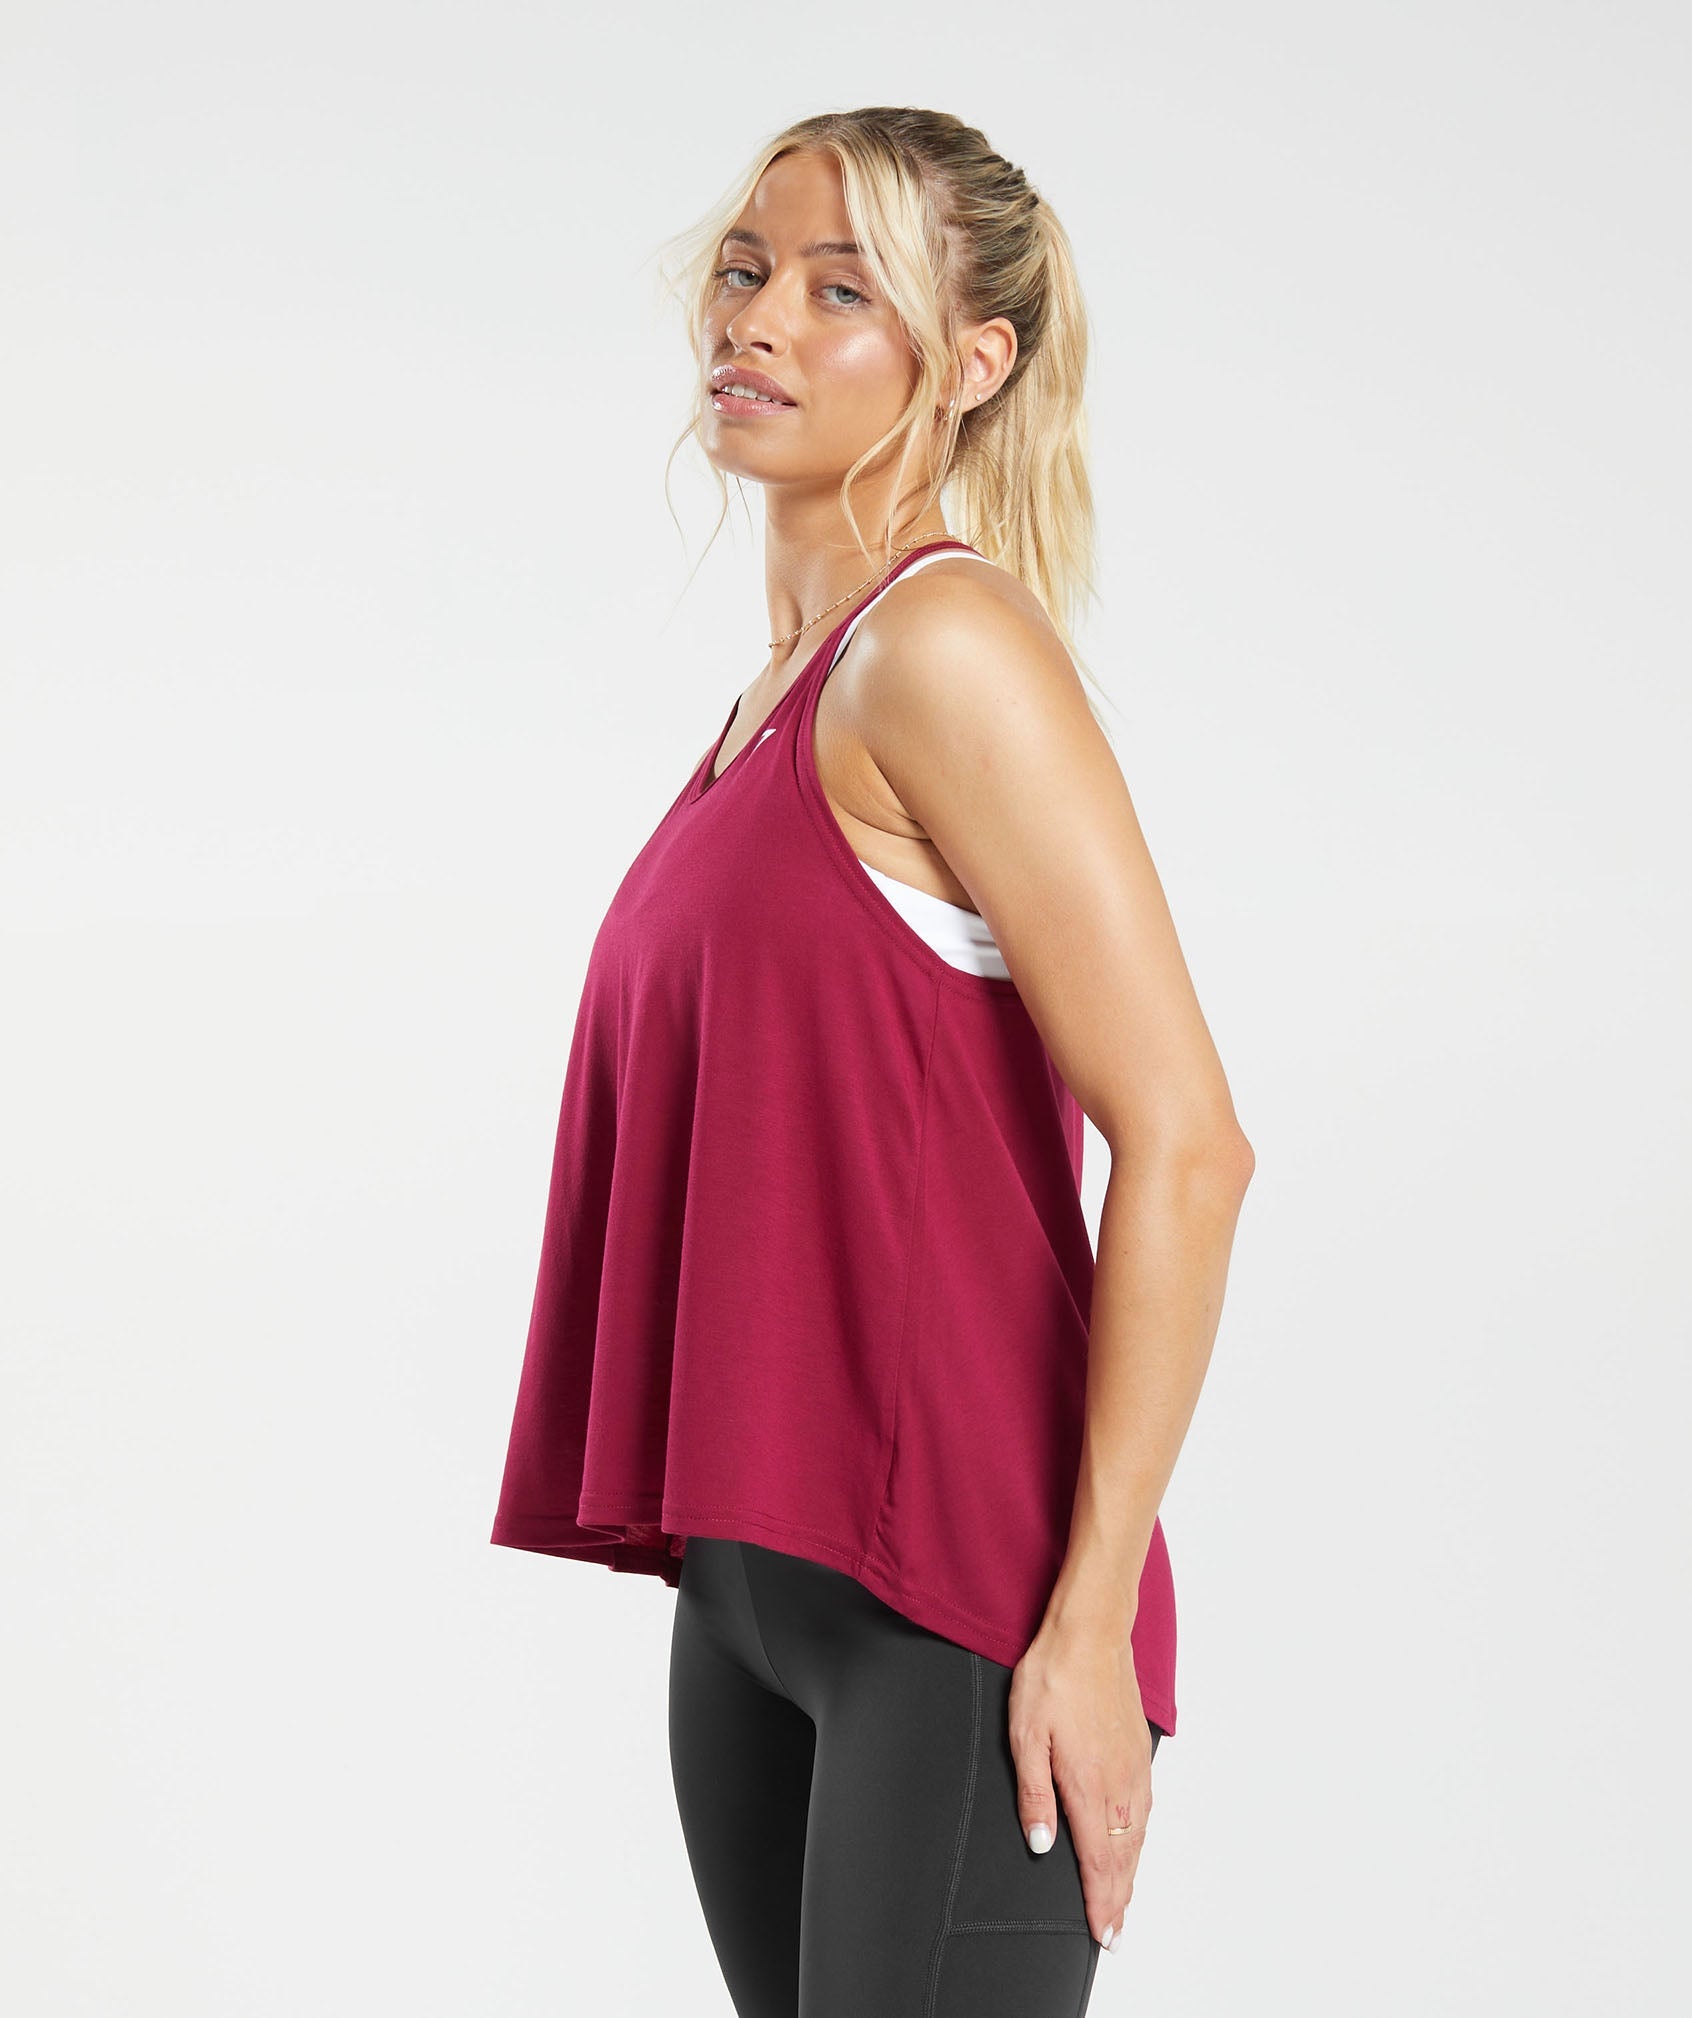 Super Soft Tank in Raspberry Pink - view 3